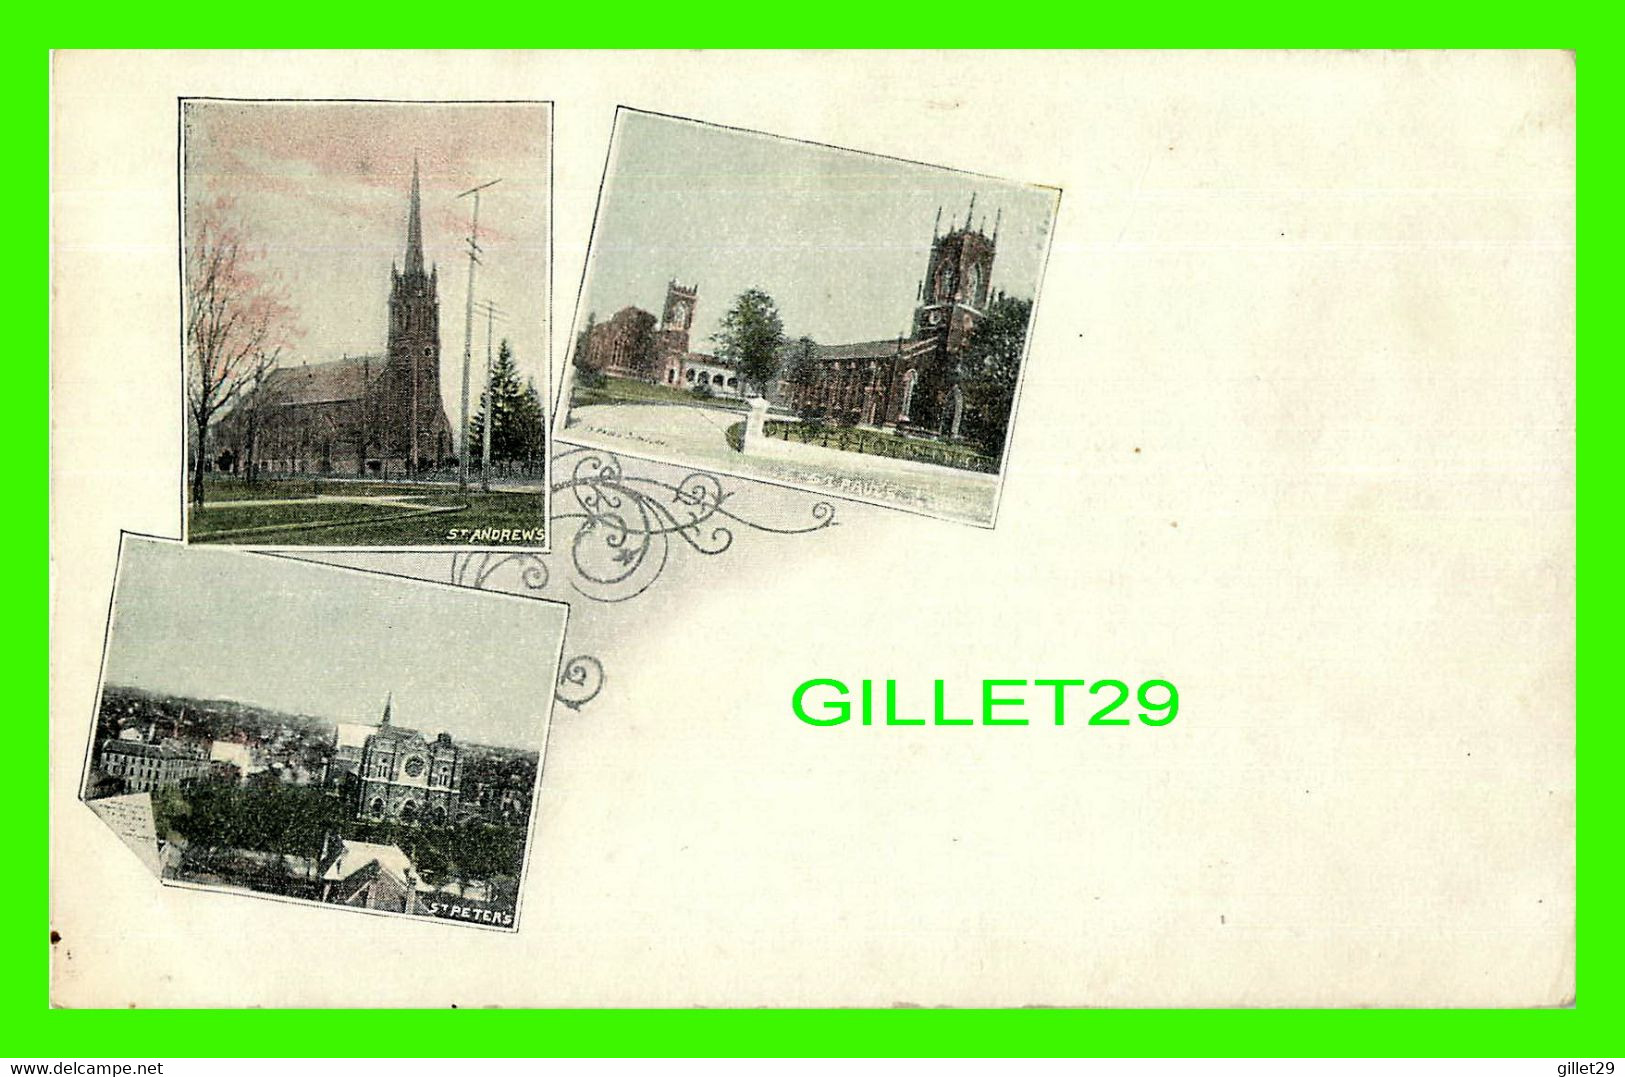 LONDON, ONTARIO - PICTURE OF 3 CHURCHES - UNDIVIDED BACK - CANADAIN POSTAL CARD - - London